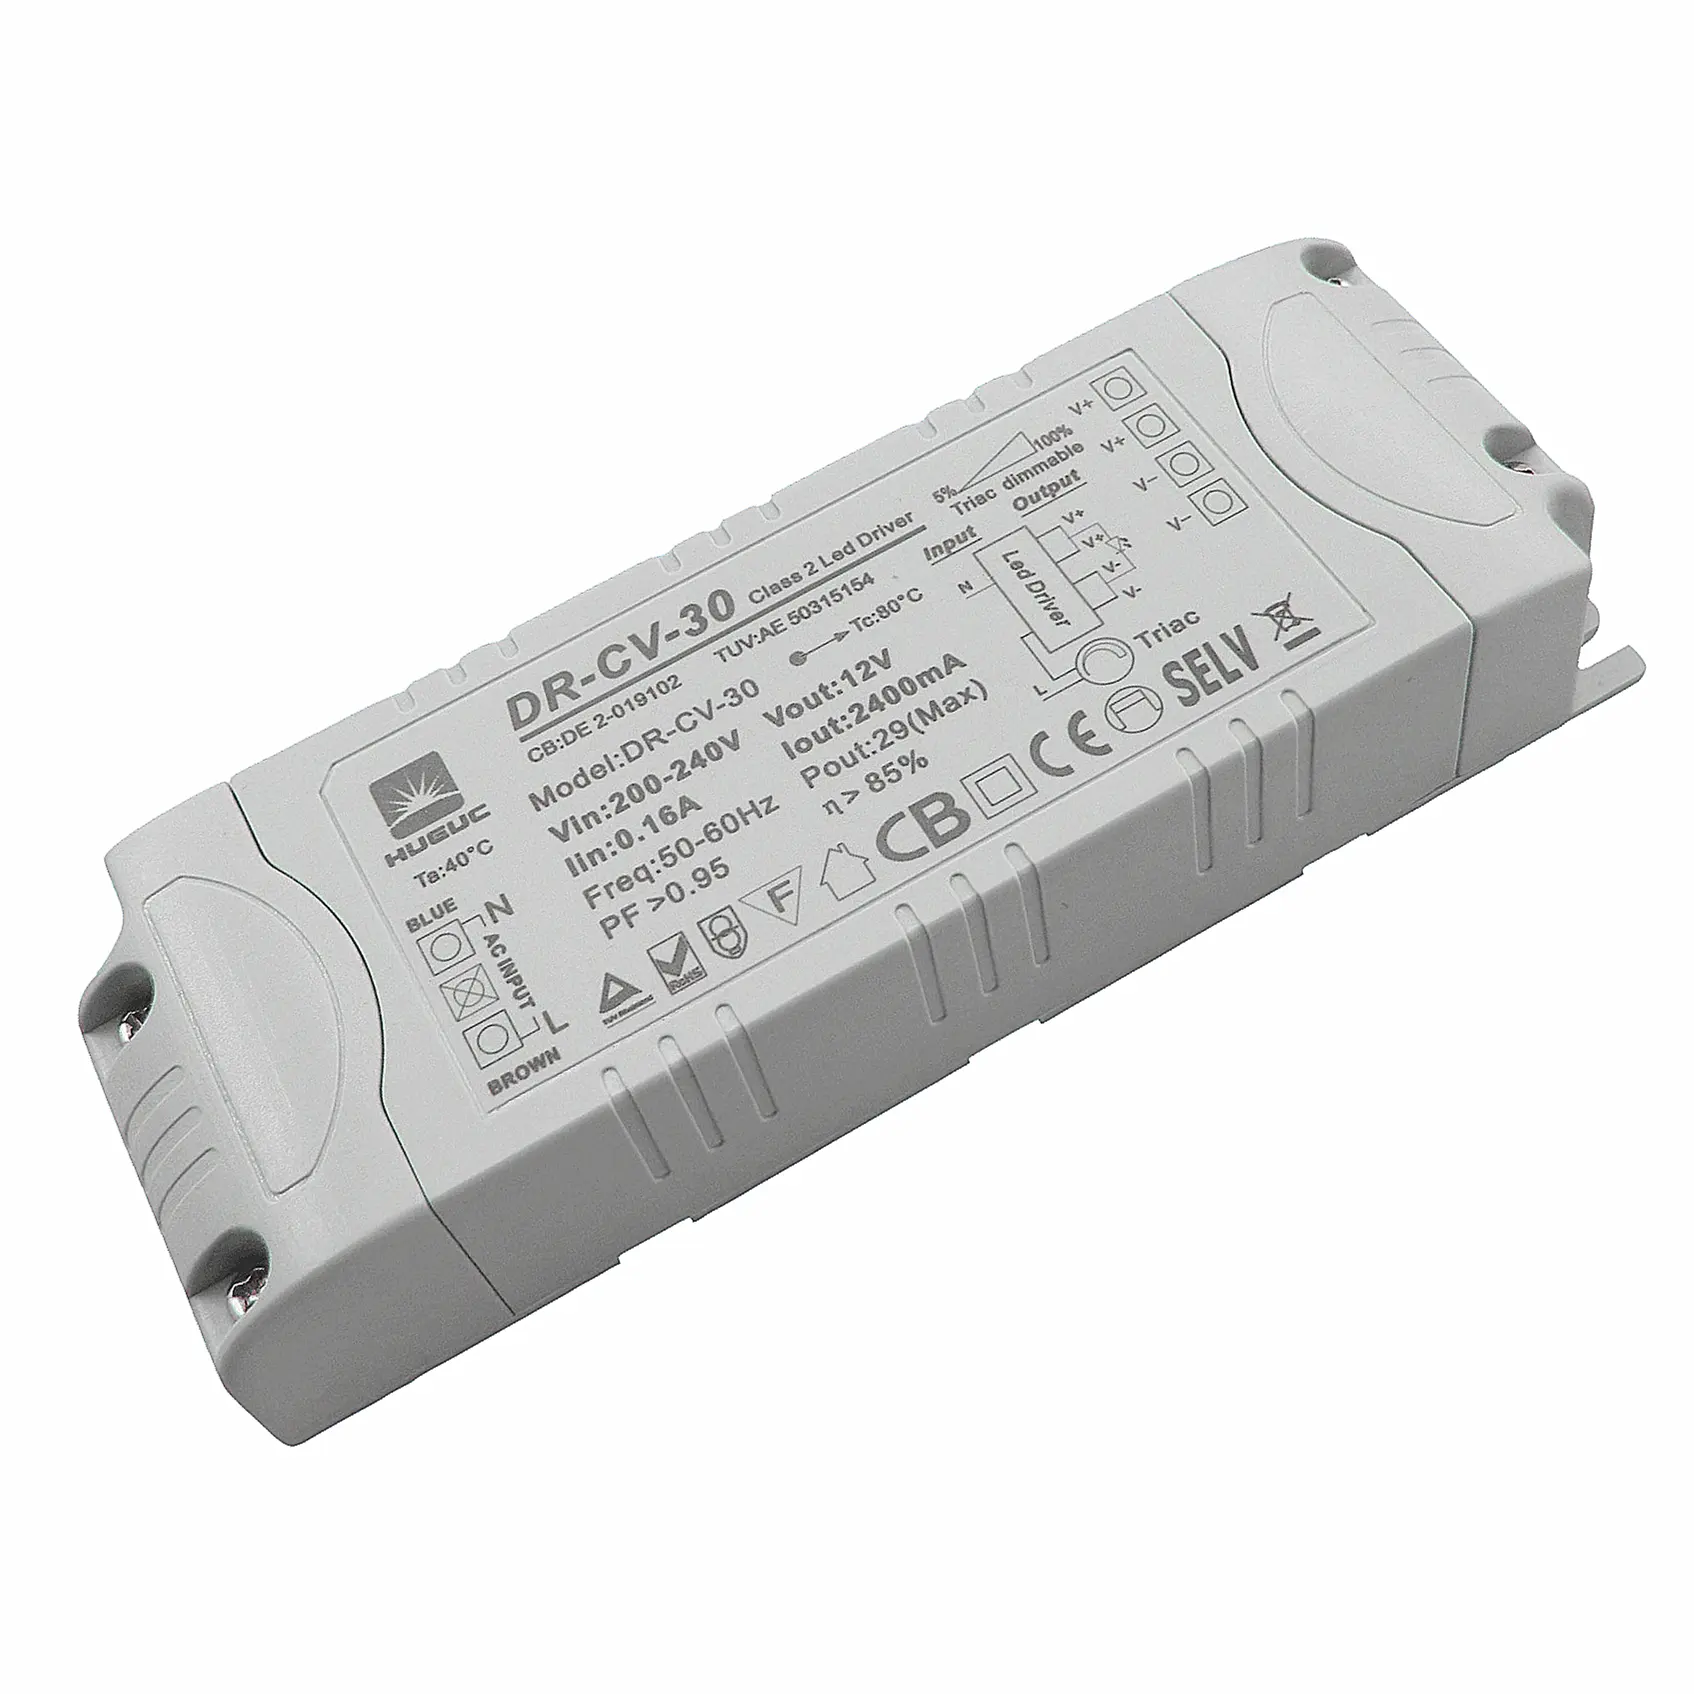 New 15W 20W led power supply non-waterproof Dimmable LED DRIVER for led strip lamp 220v 12v/24V